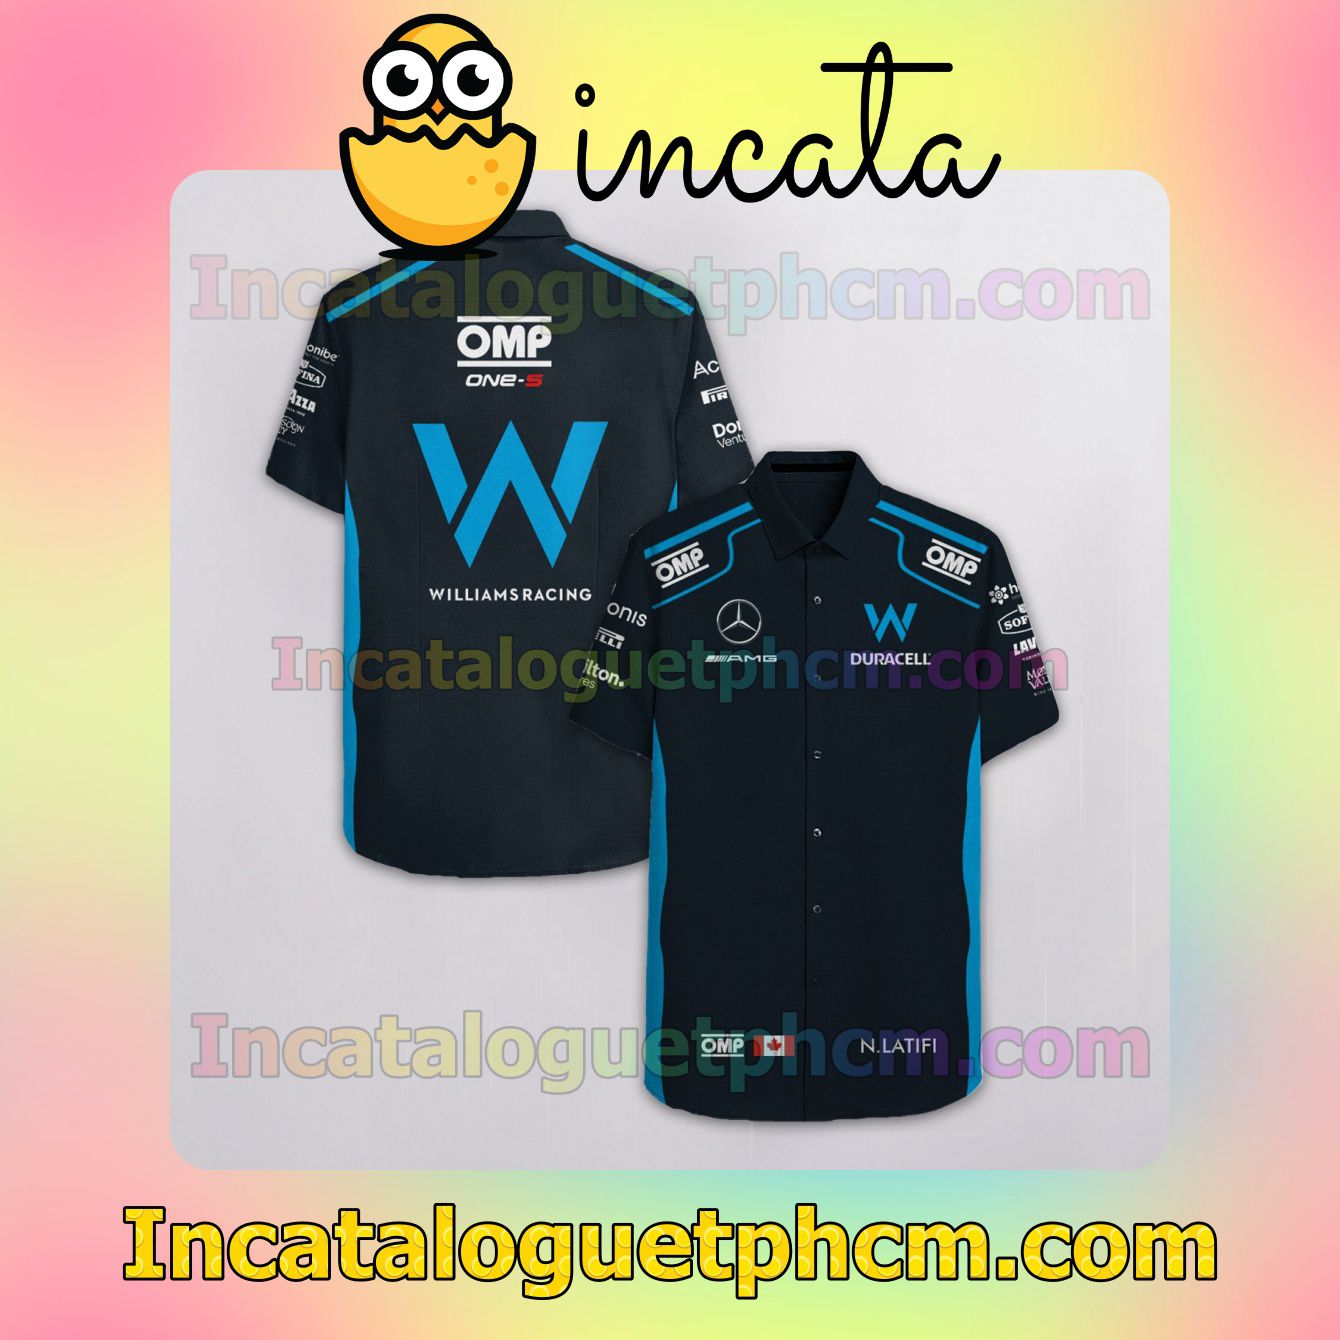 George Russell 63 Mercedes AMG Petronas F1 Team Racing Team Viewer Ubs Button Shirt And Swim Trunk